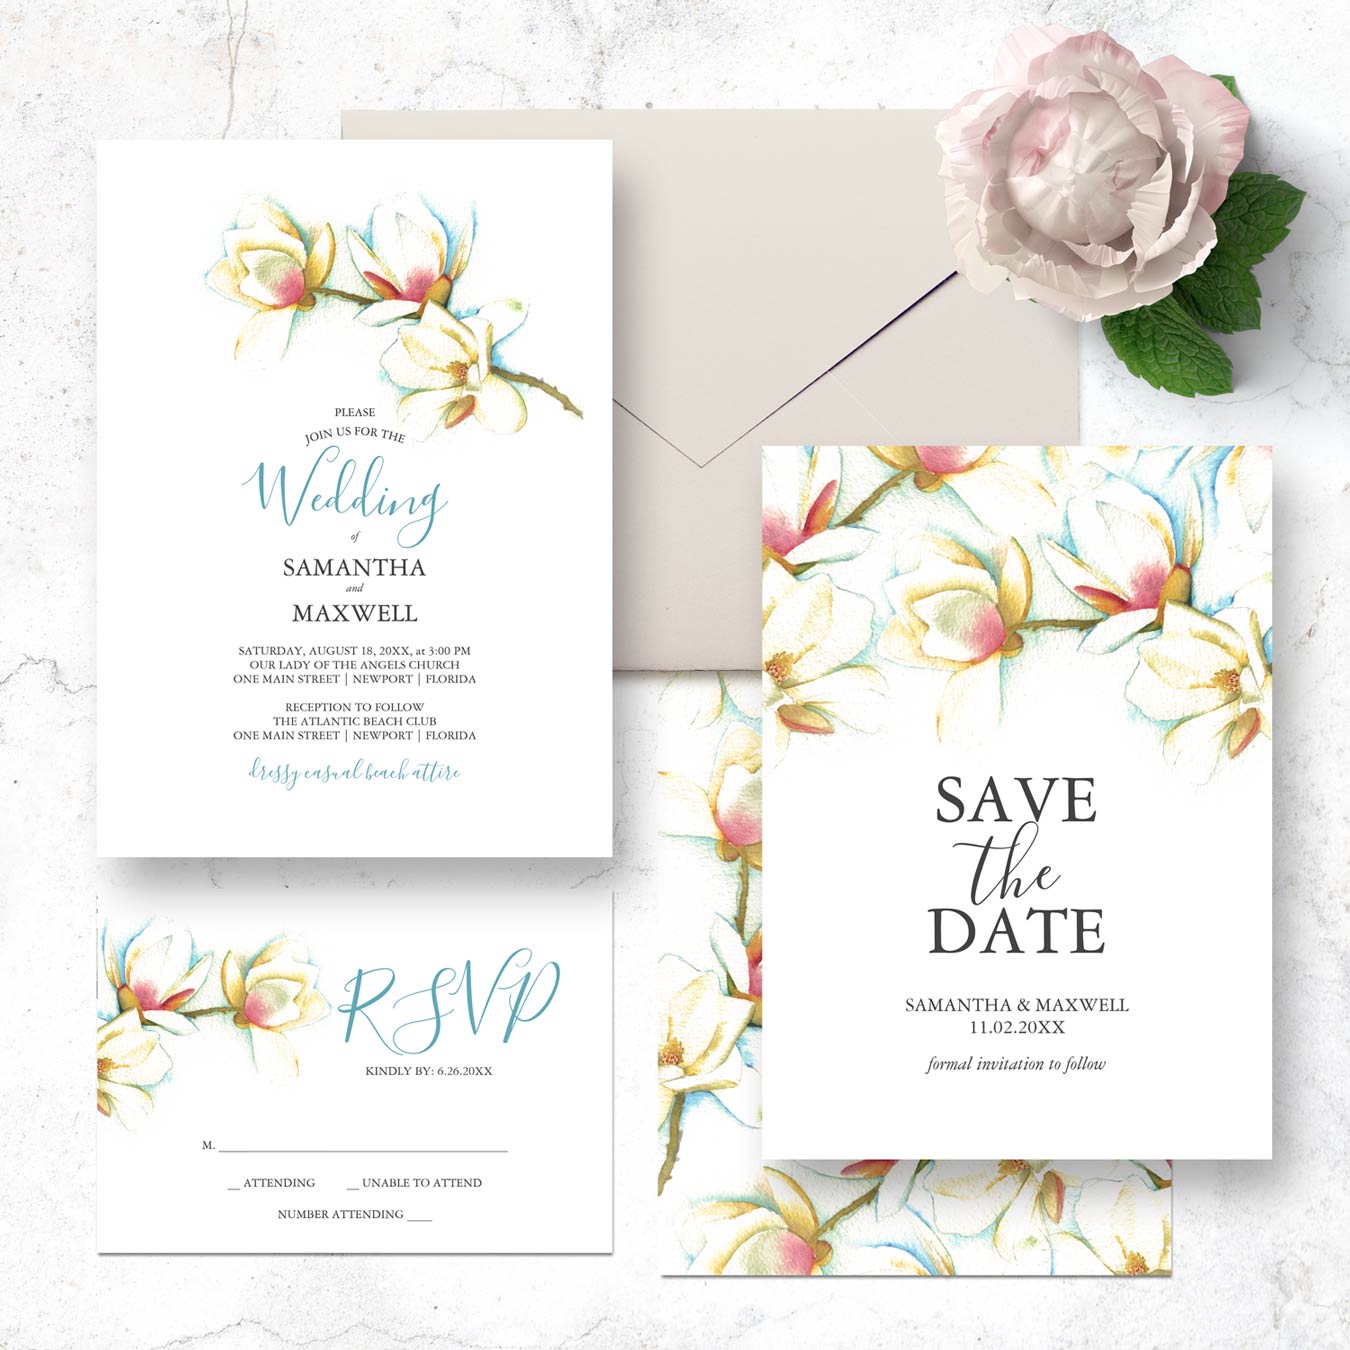 Wedding invitations template features watercolor white magnolia flowers art by Victoria Grigaliunas. Click the image to shop this line.